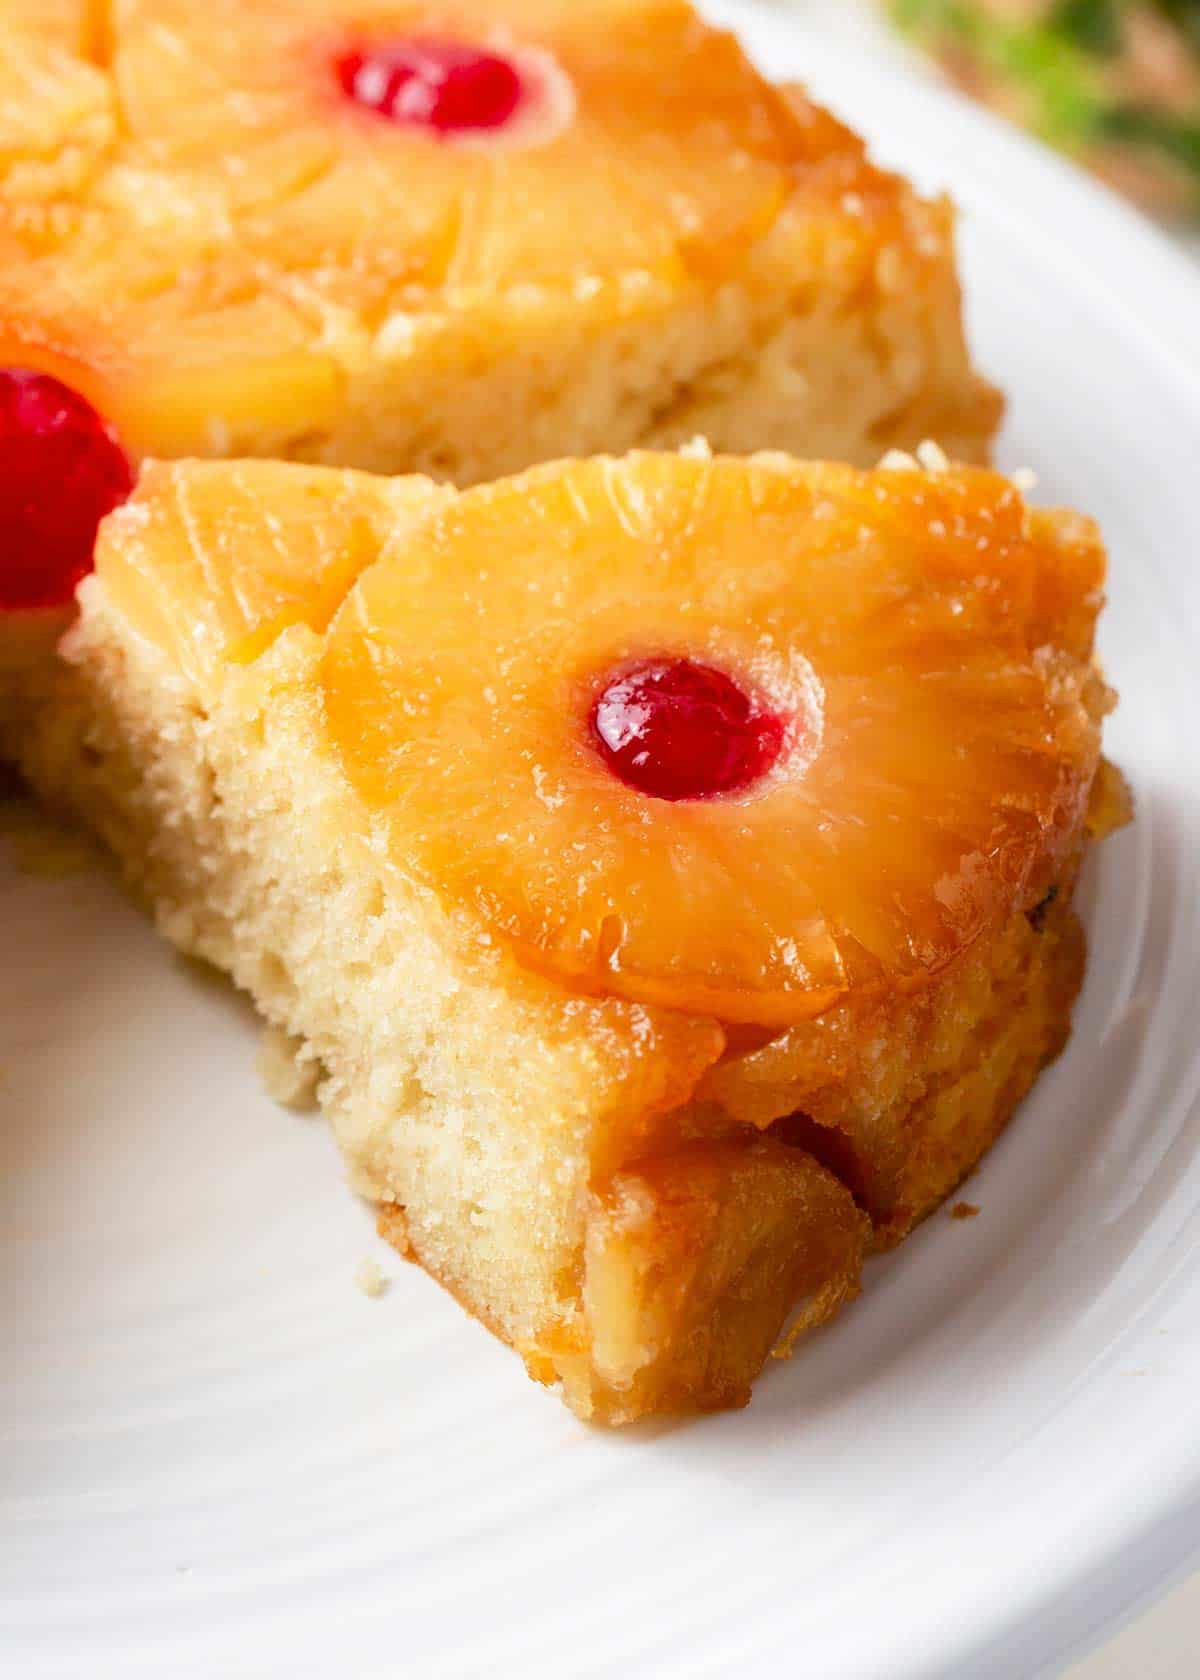 Slice of Pineapple upside down cake on a white plate.